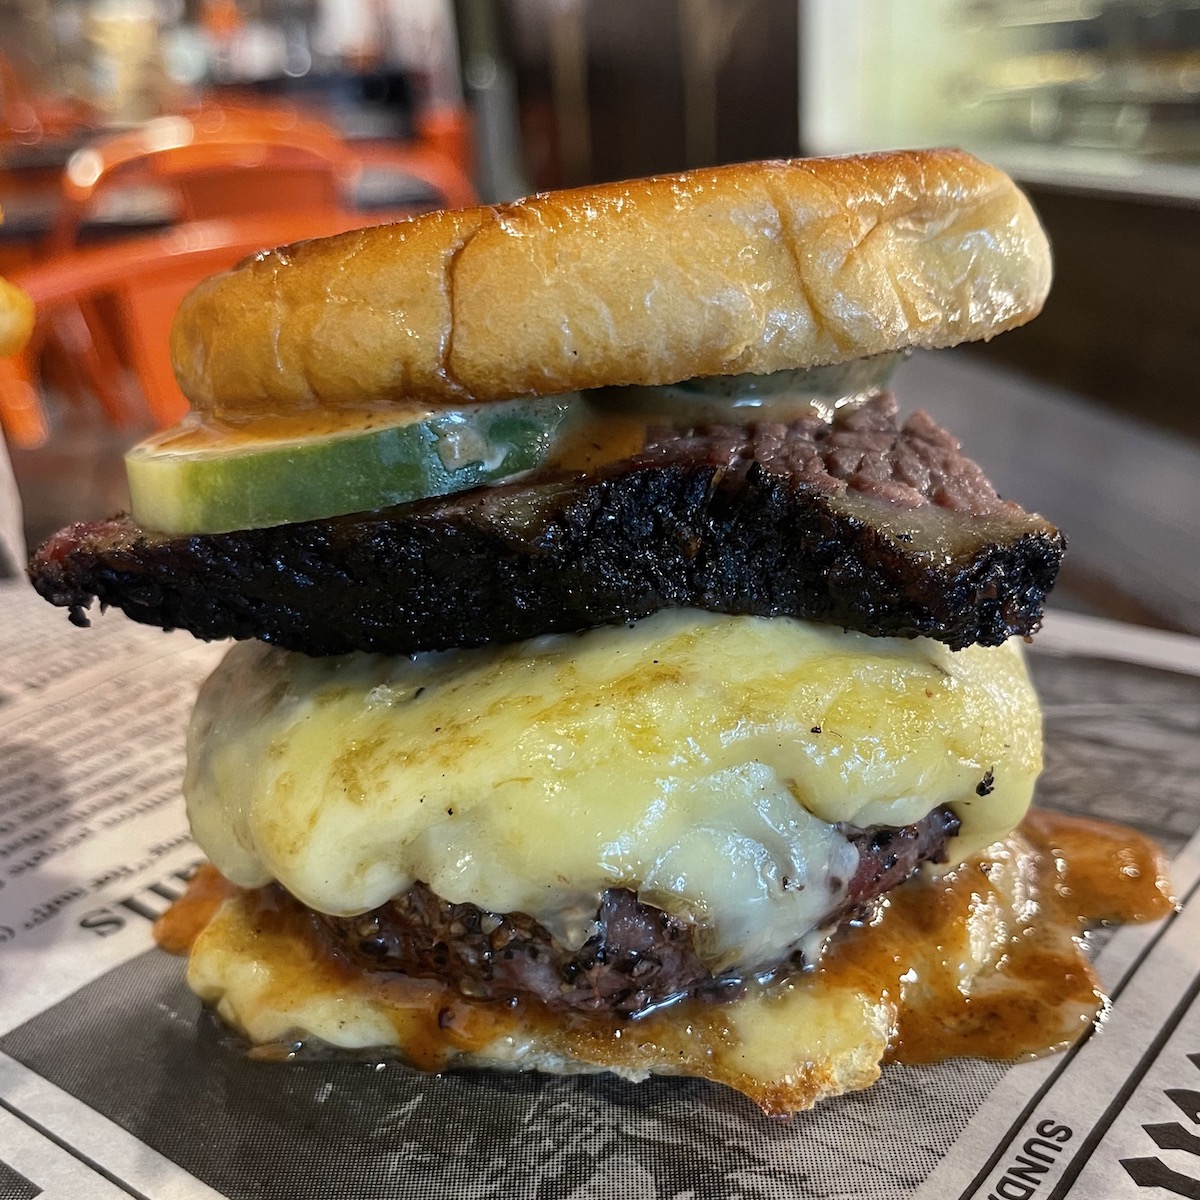 Brisket Burger from Smoke and Dough in West Kendall, Florida